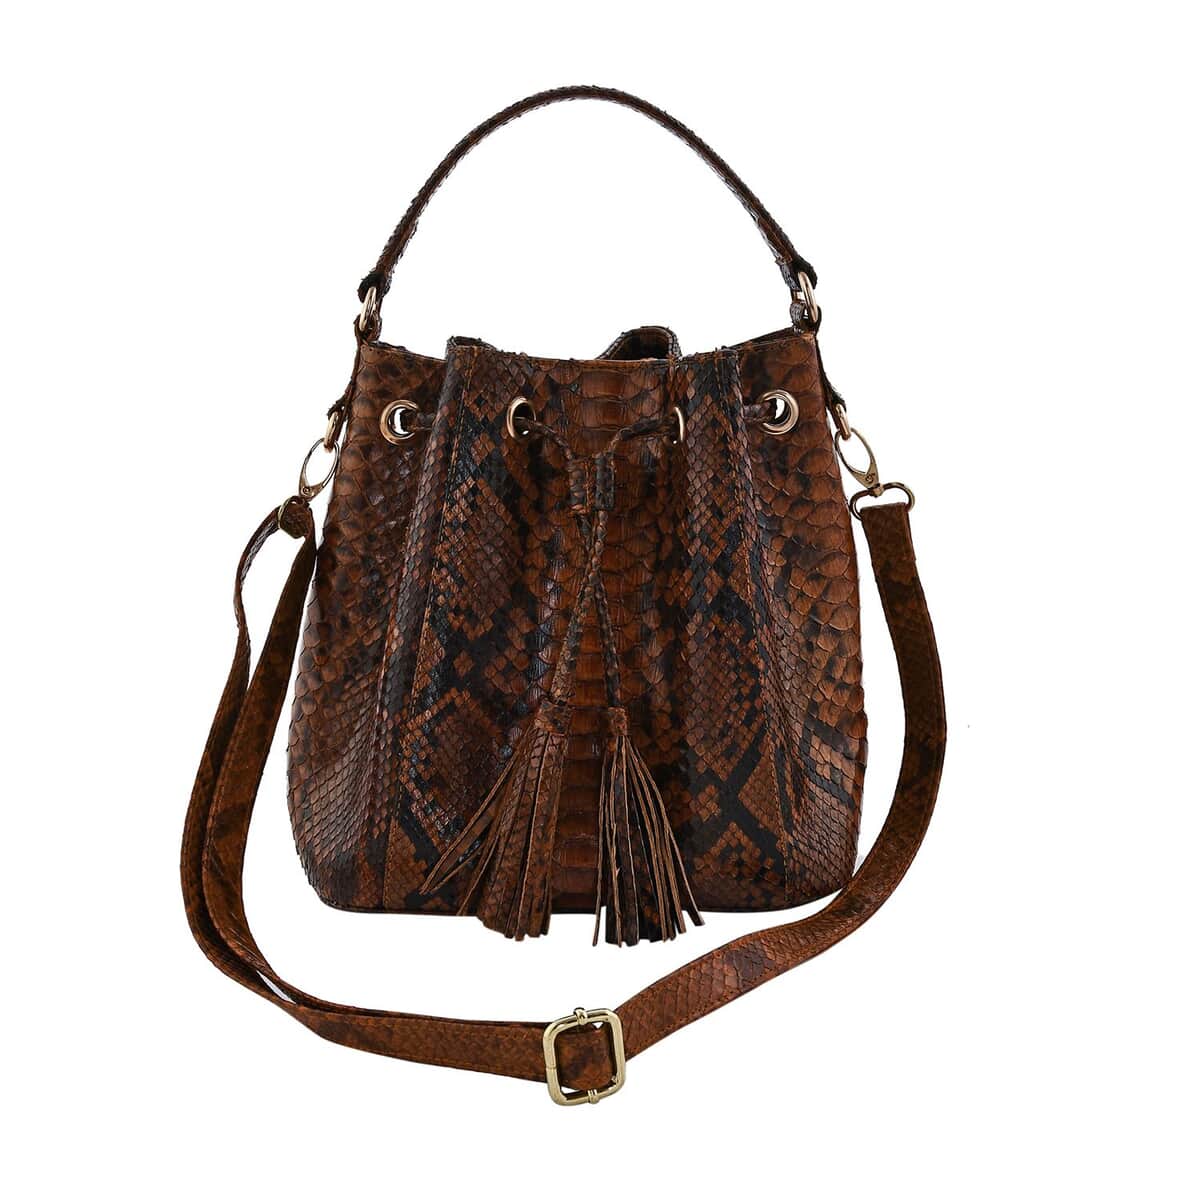 Doorbuster The Grand Pelle Handcrafted Brown Color Genuine Python Leather Tote Bag (15"x4.75"x10") image number 2